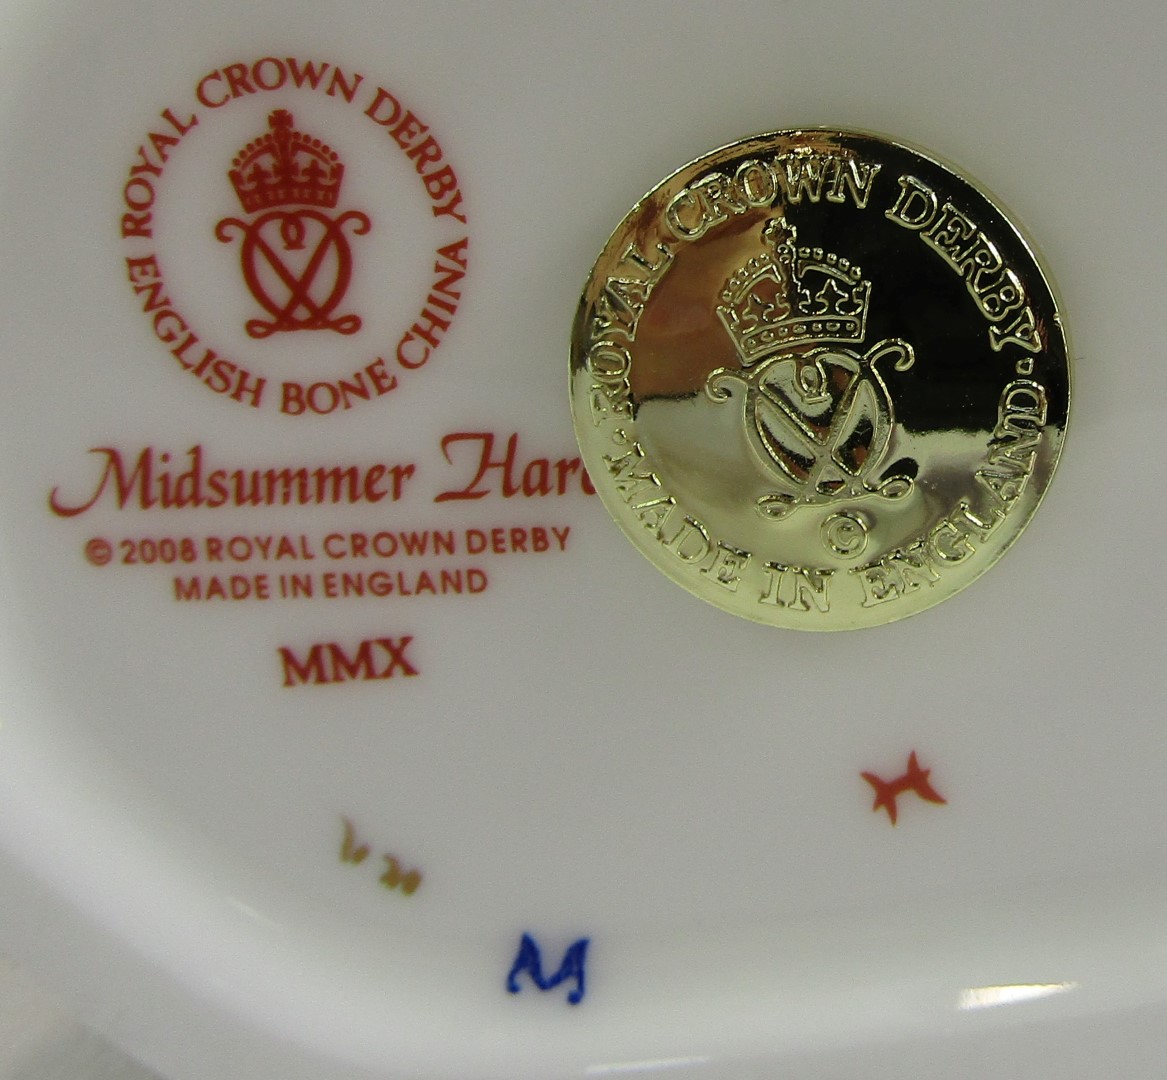 A Royal Crown Derby porcelain paperweight modelled as Mid-Summer Hare, gold stopper and red printed - Image 3 of 3